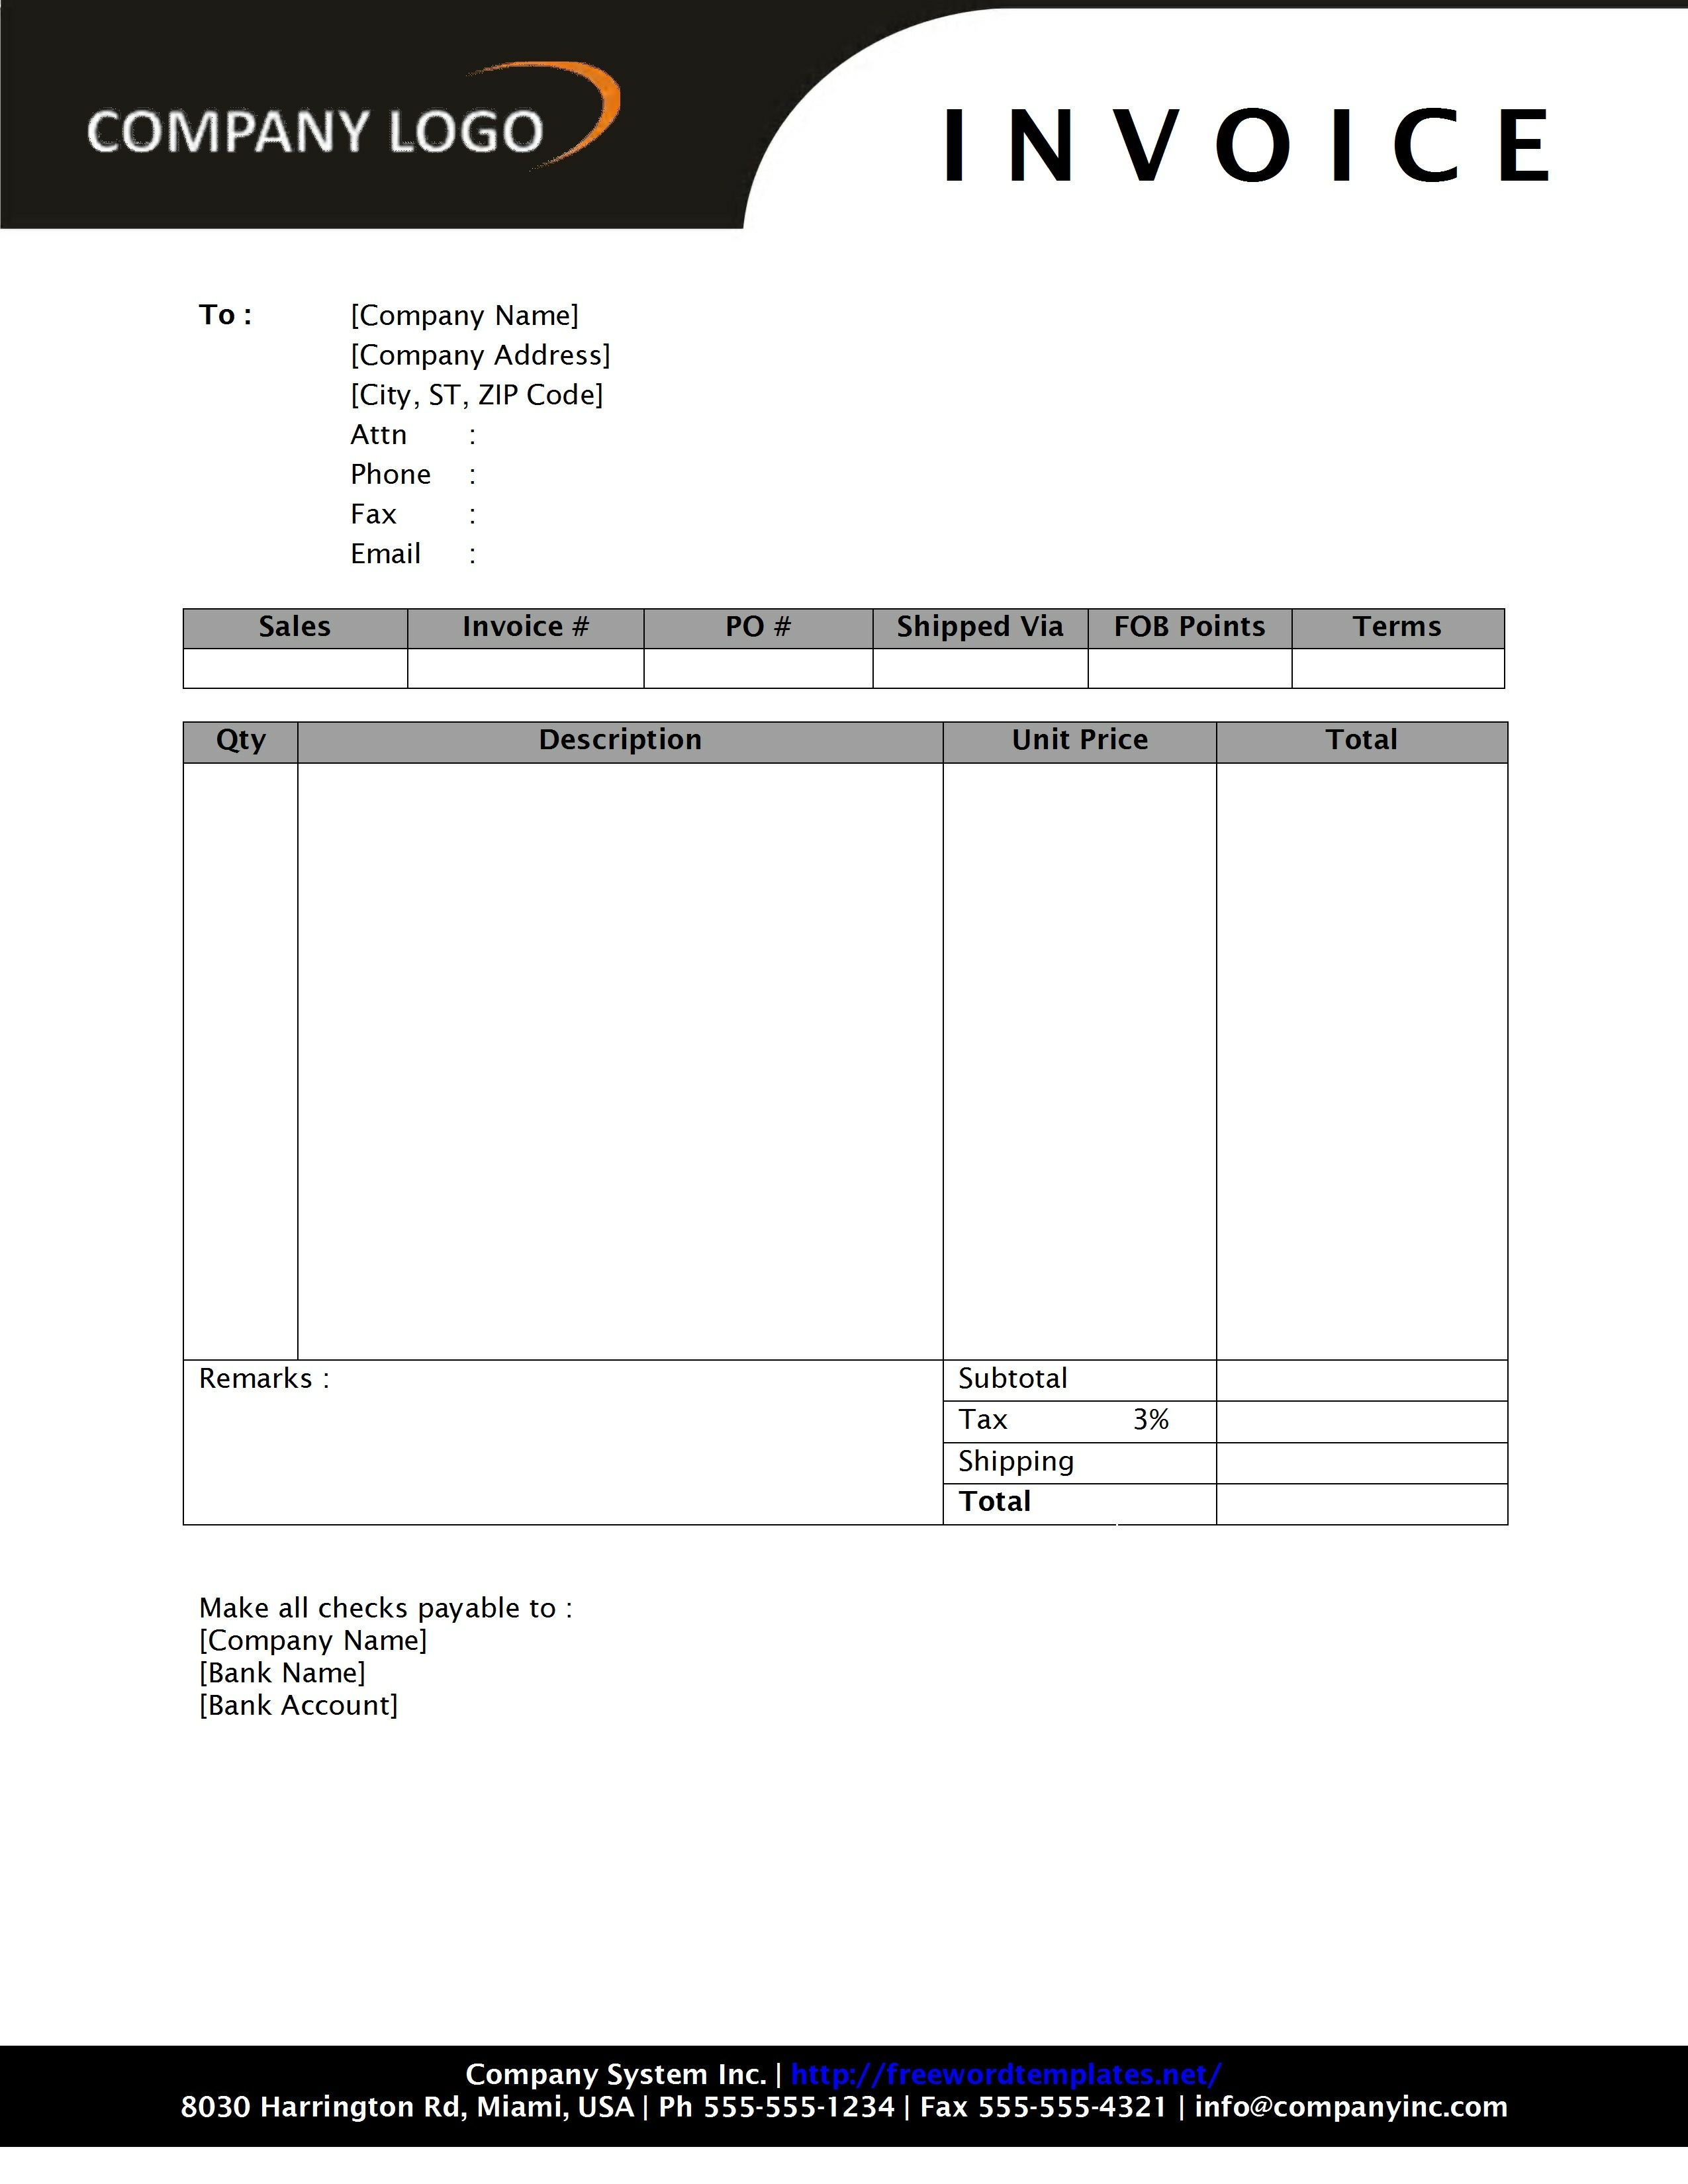 free invoice template microsoft word simple sales invoice invoice simple sales invoice template